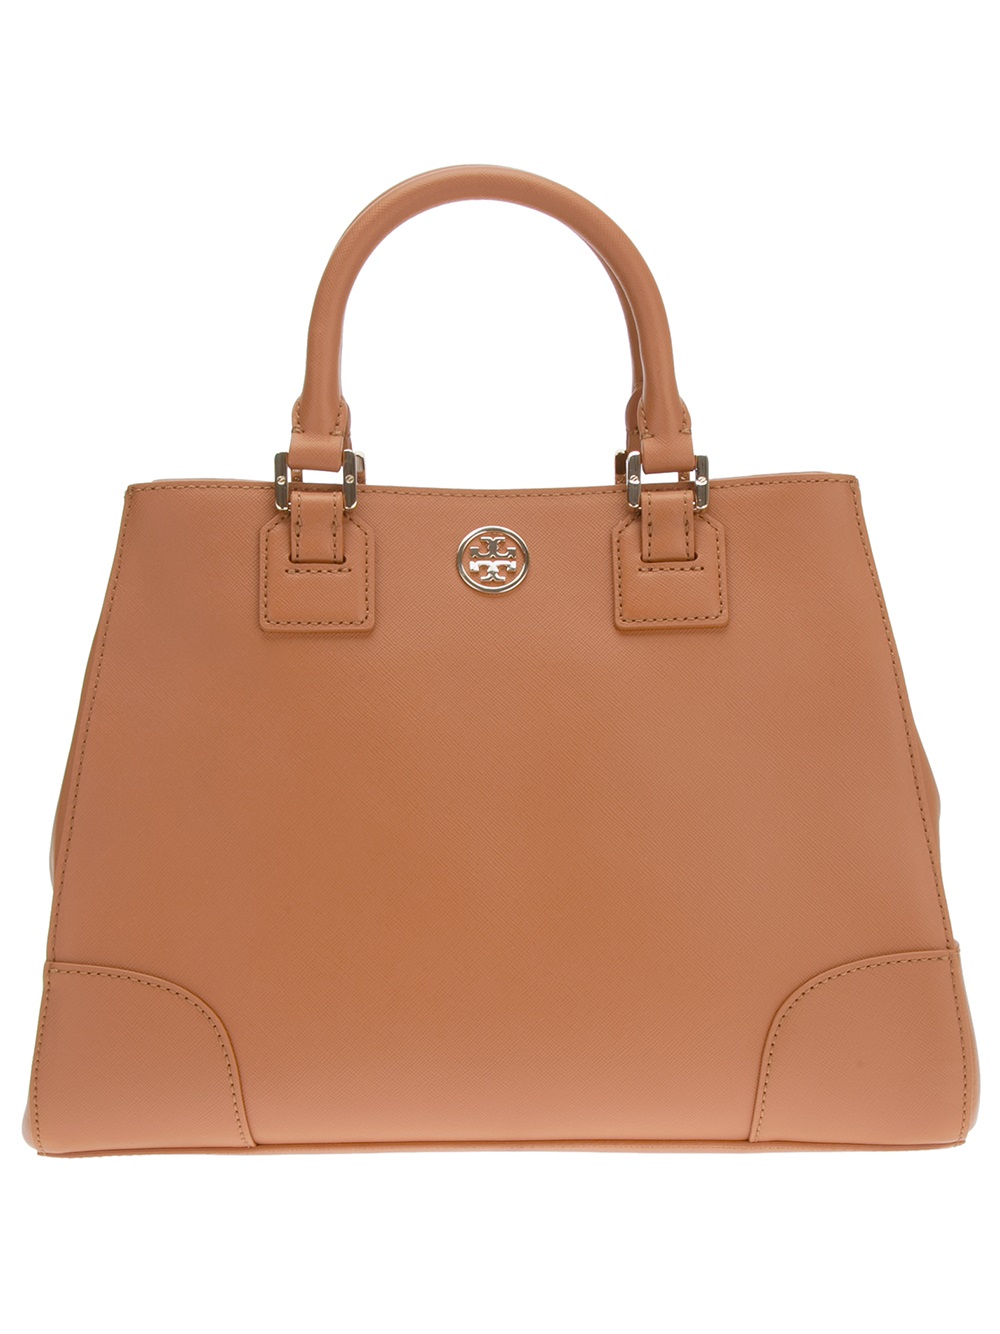 Tory Burch Robinson Triangle Tote in Brown - Lyst